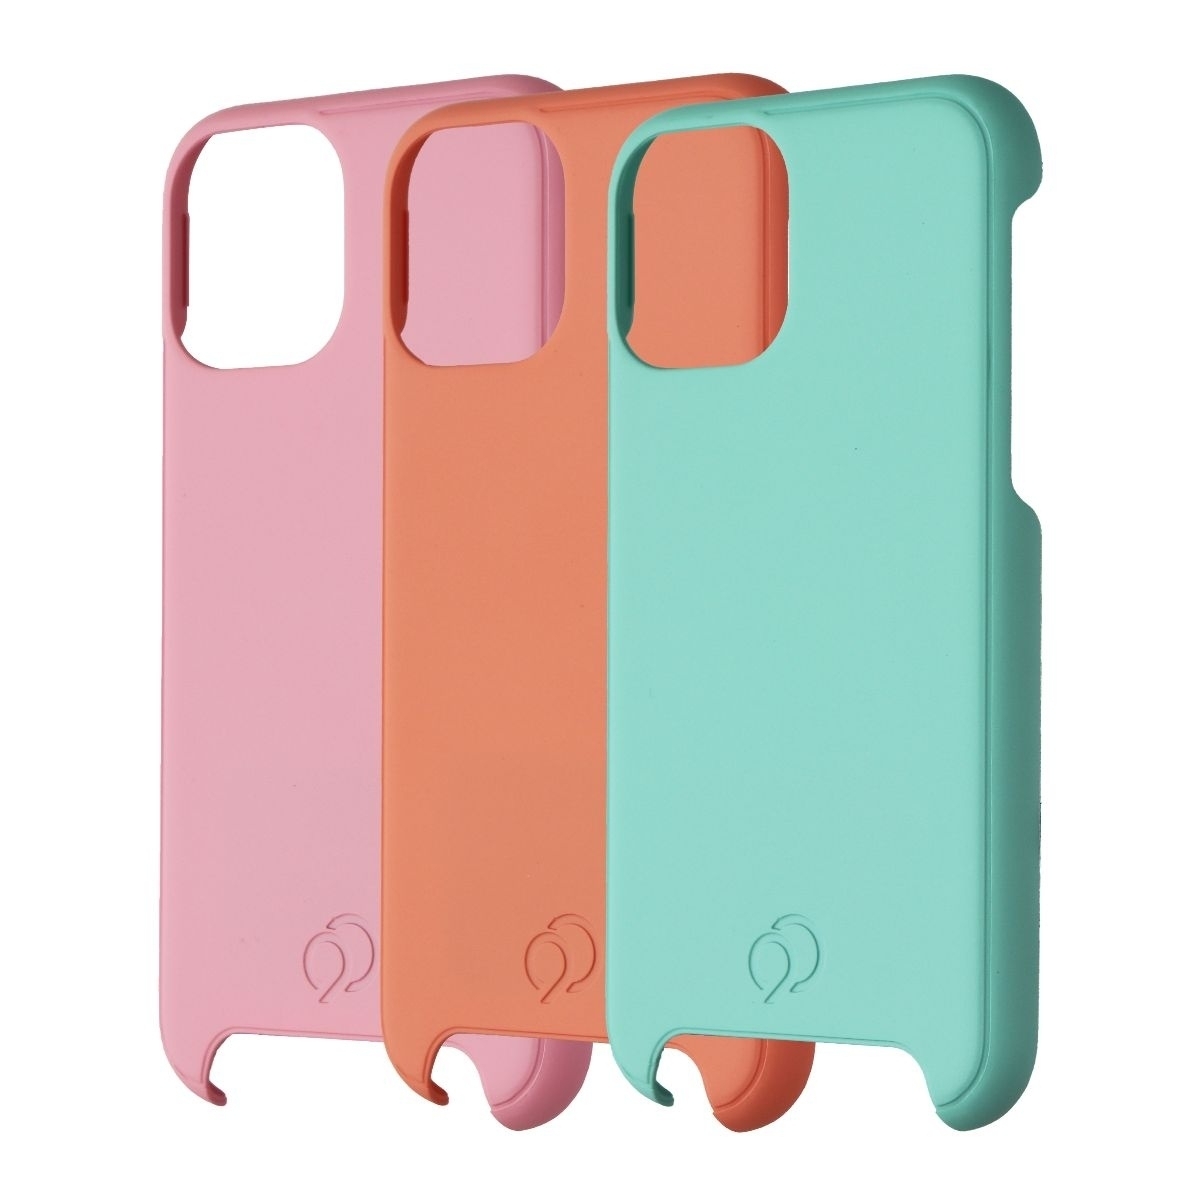 Nimbus9 Cirrus 2 Lifestyle Kit For IPhone 11 Pro/ Xs/ X - Tropical Collection